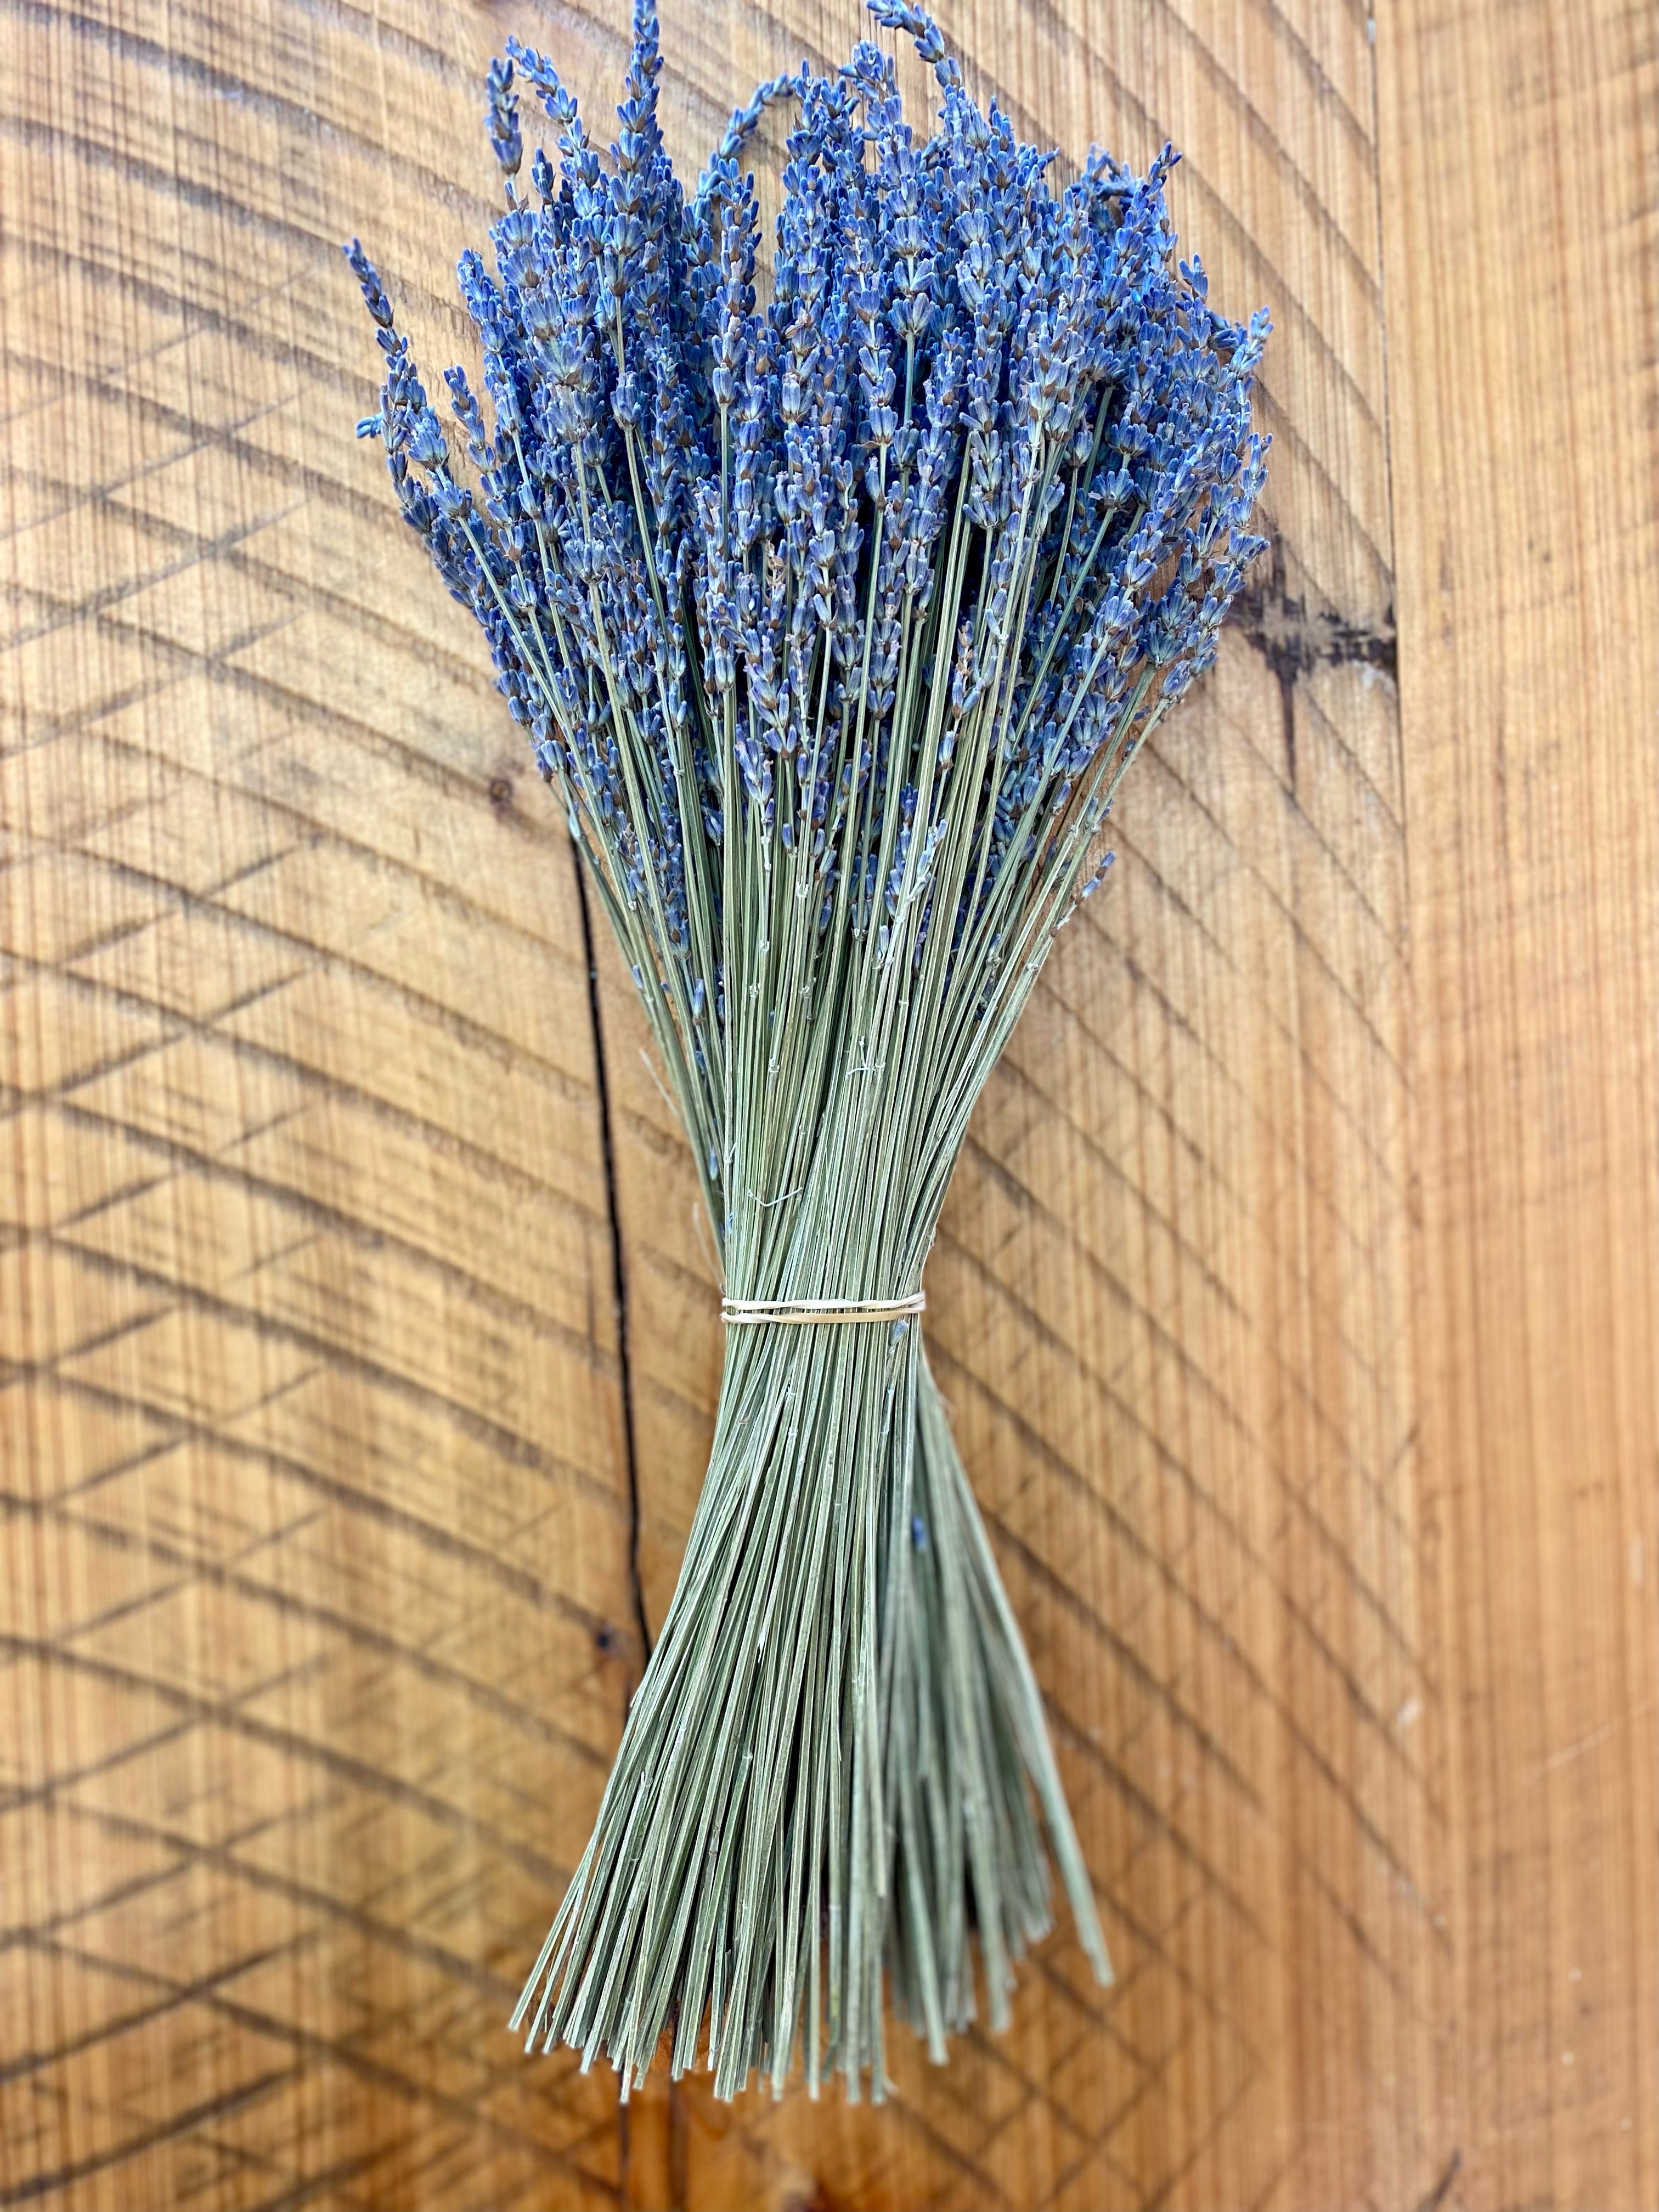 Dried Lavender – The Garland Guy